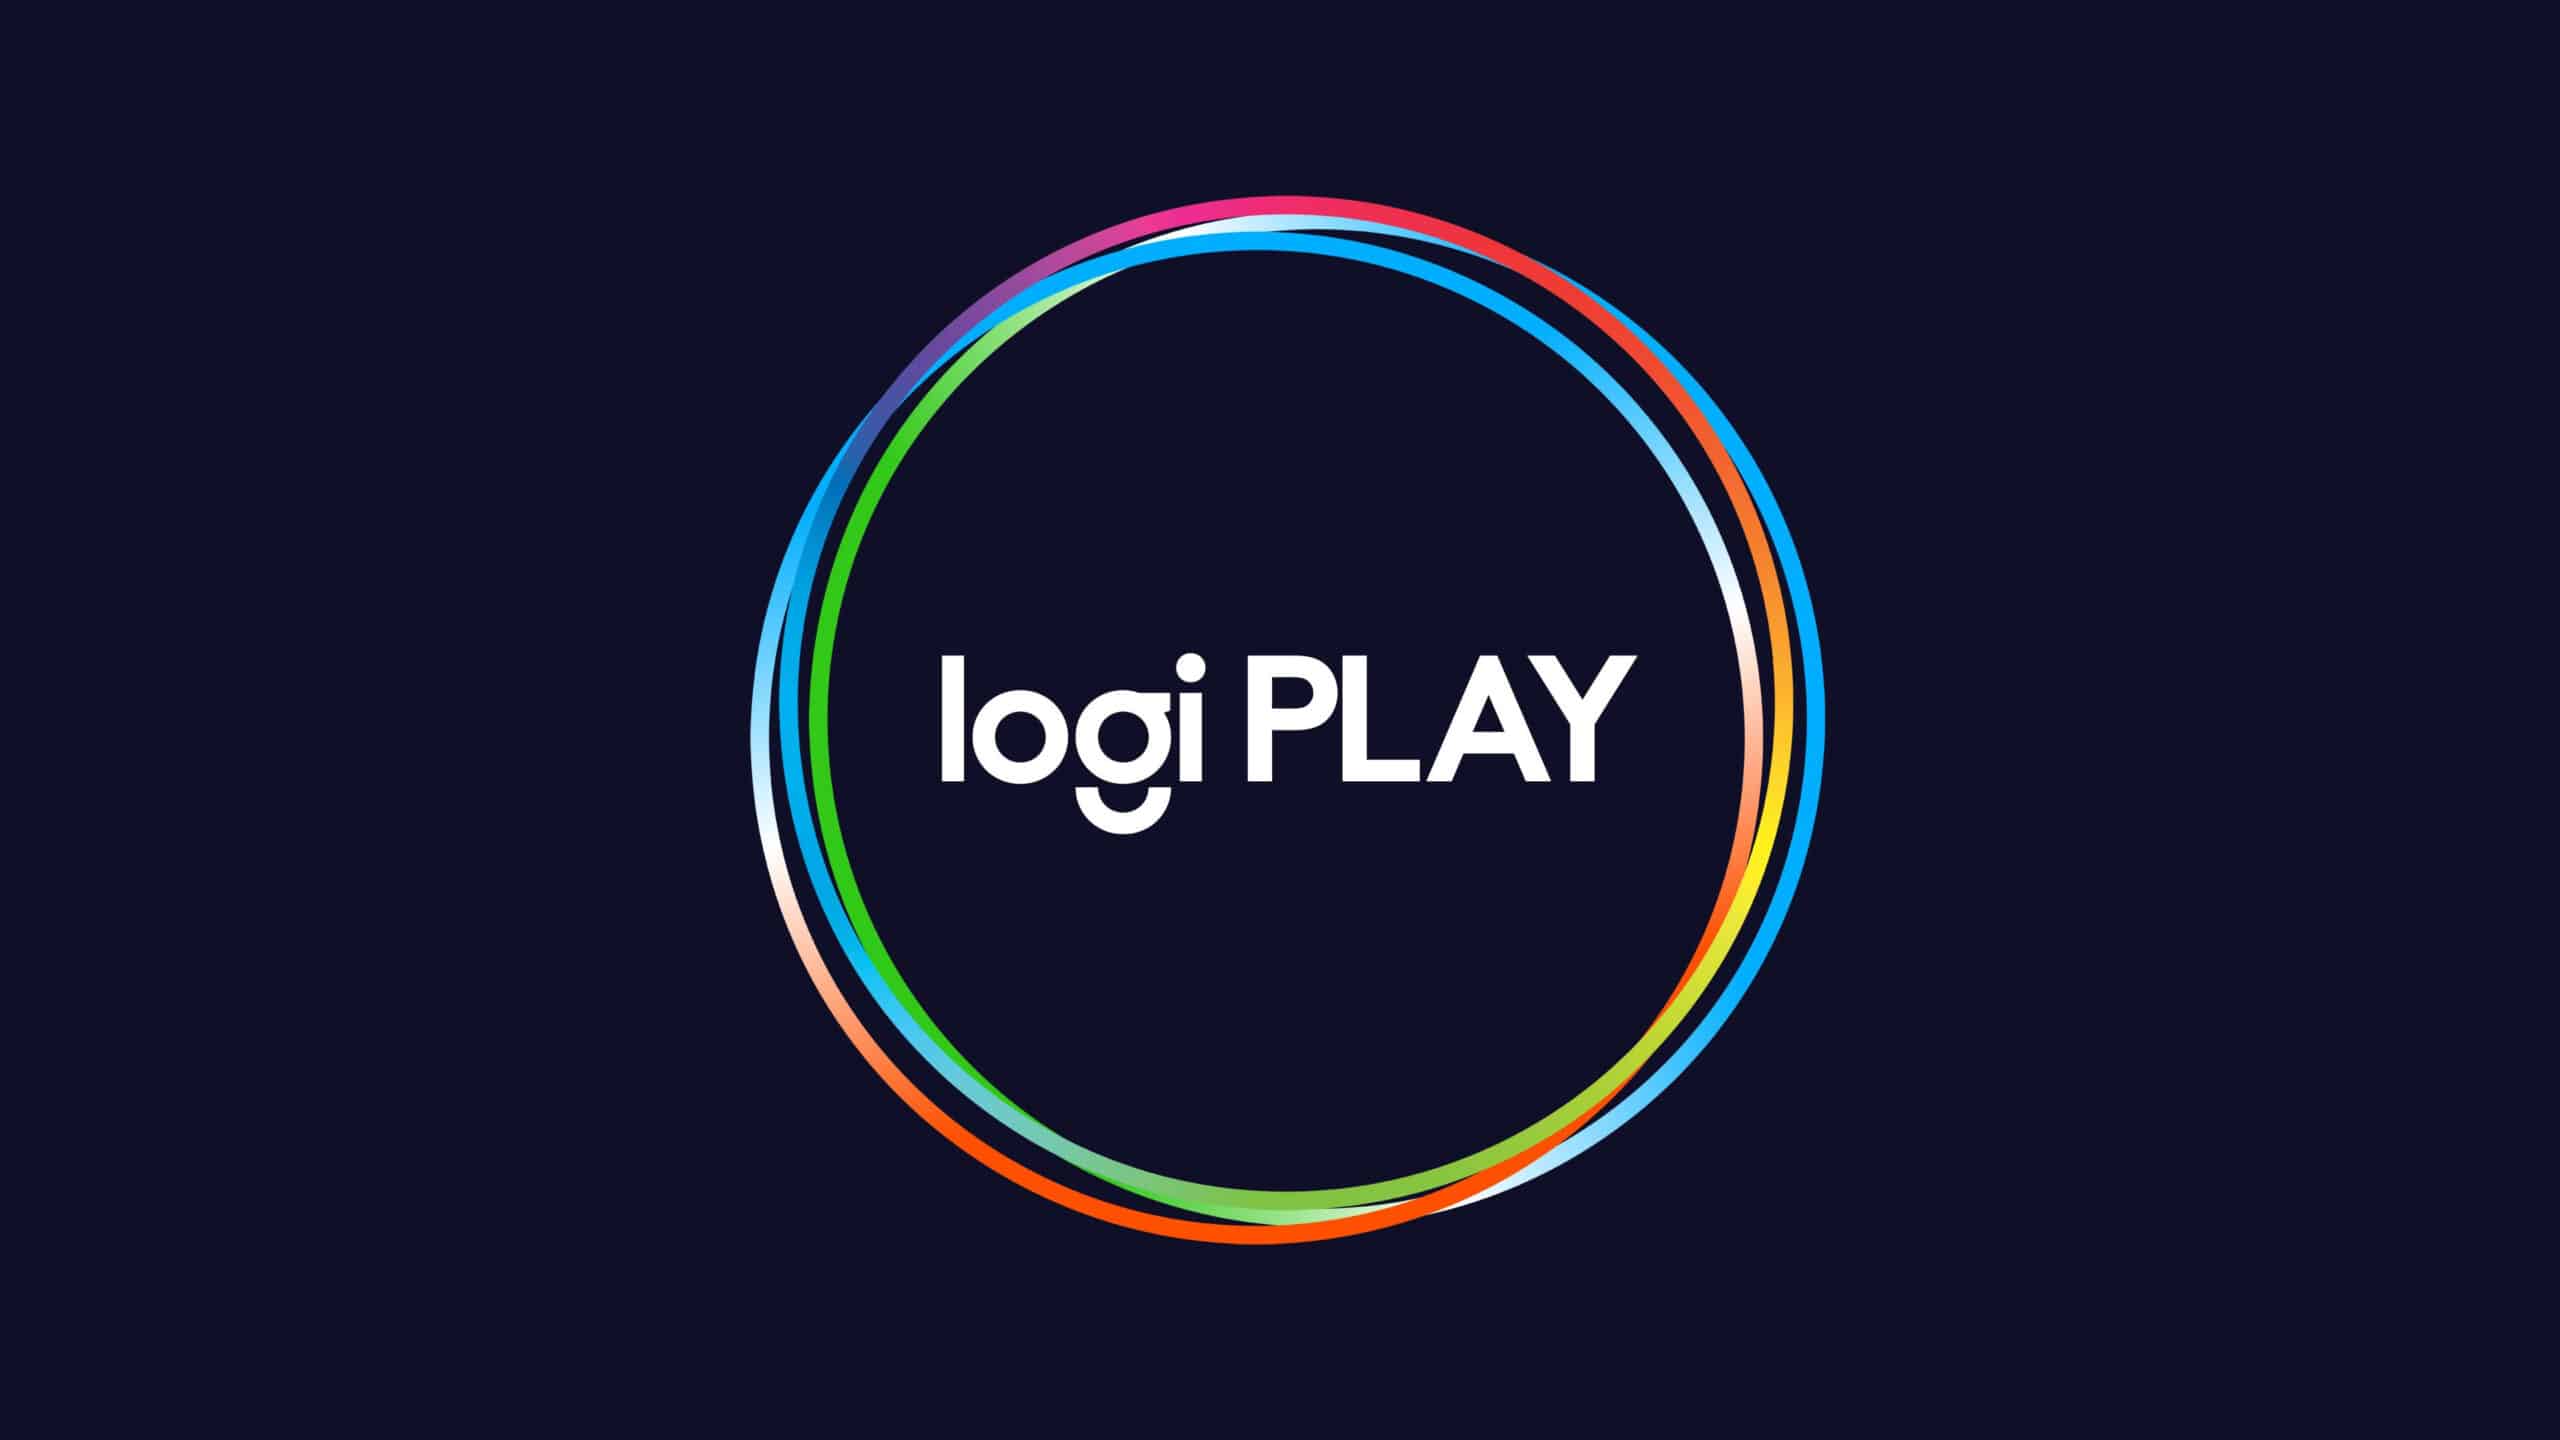 Logitech prepares Logi PLAY: new event dedicated to gaming and streaming thumbnail